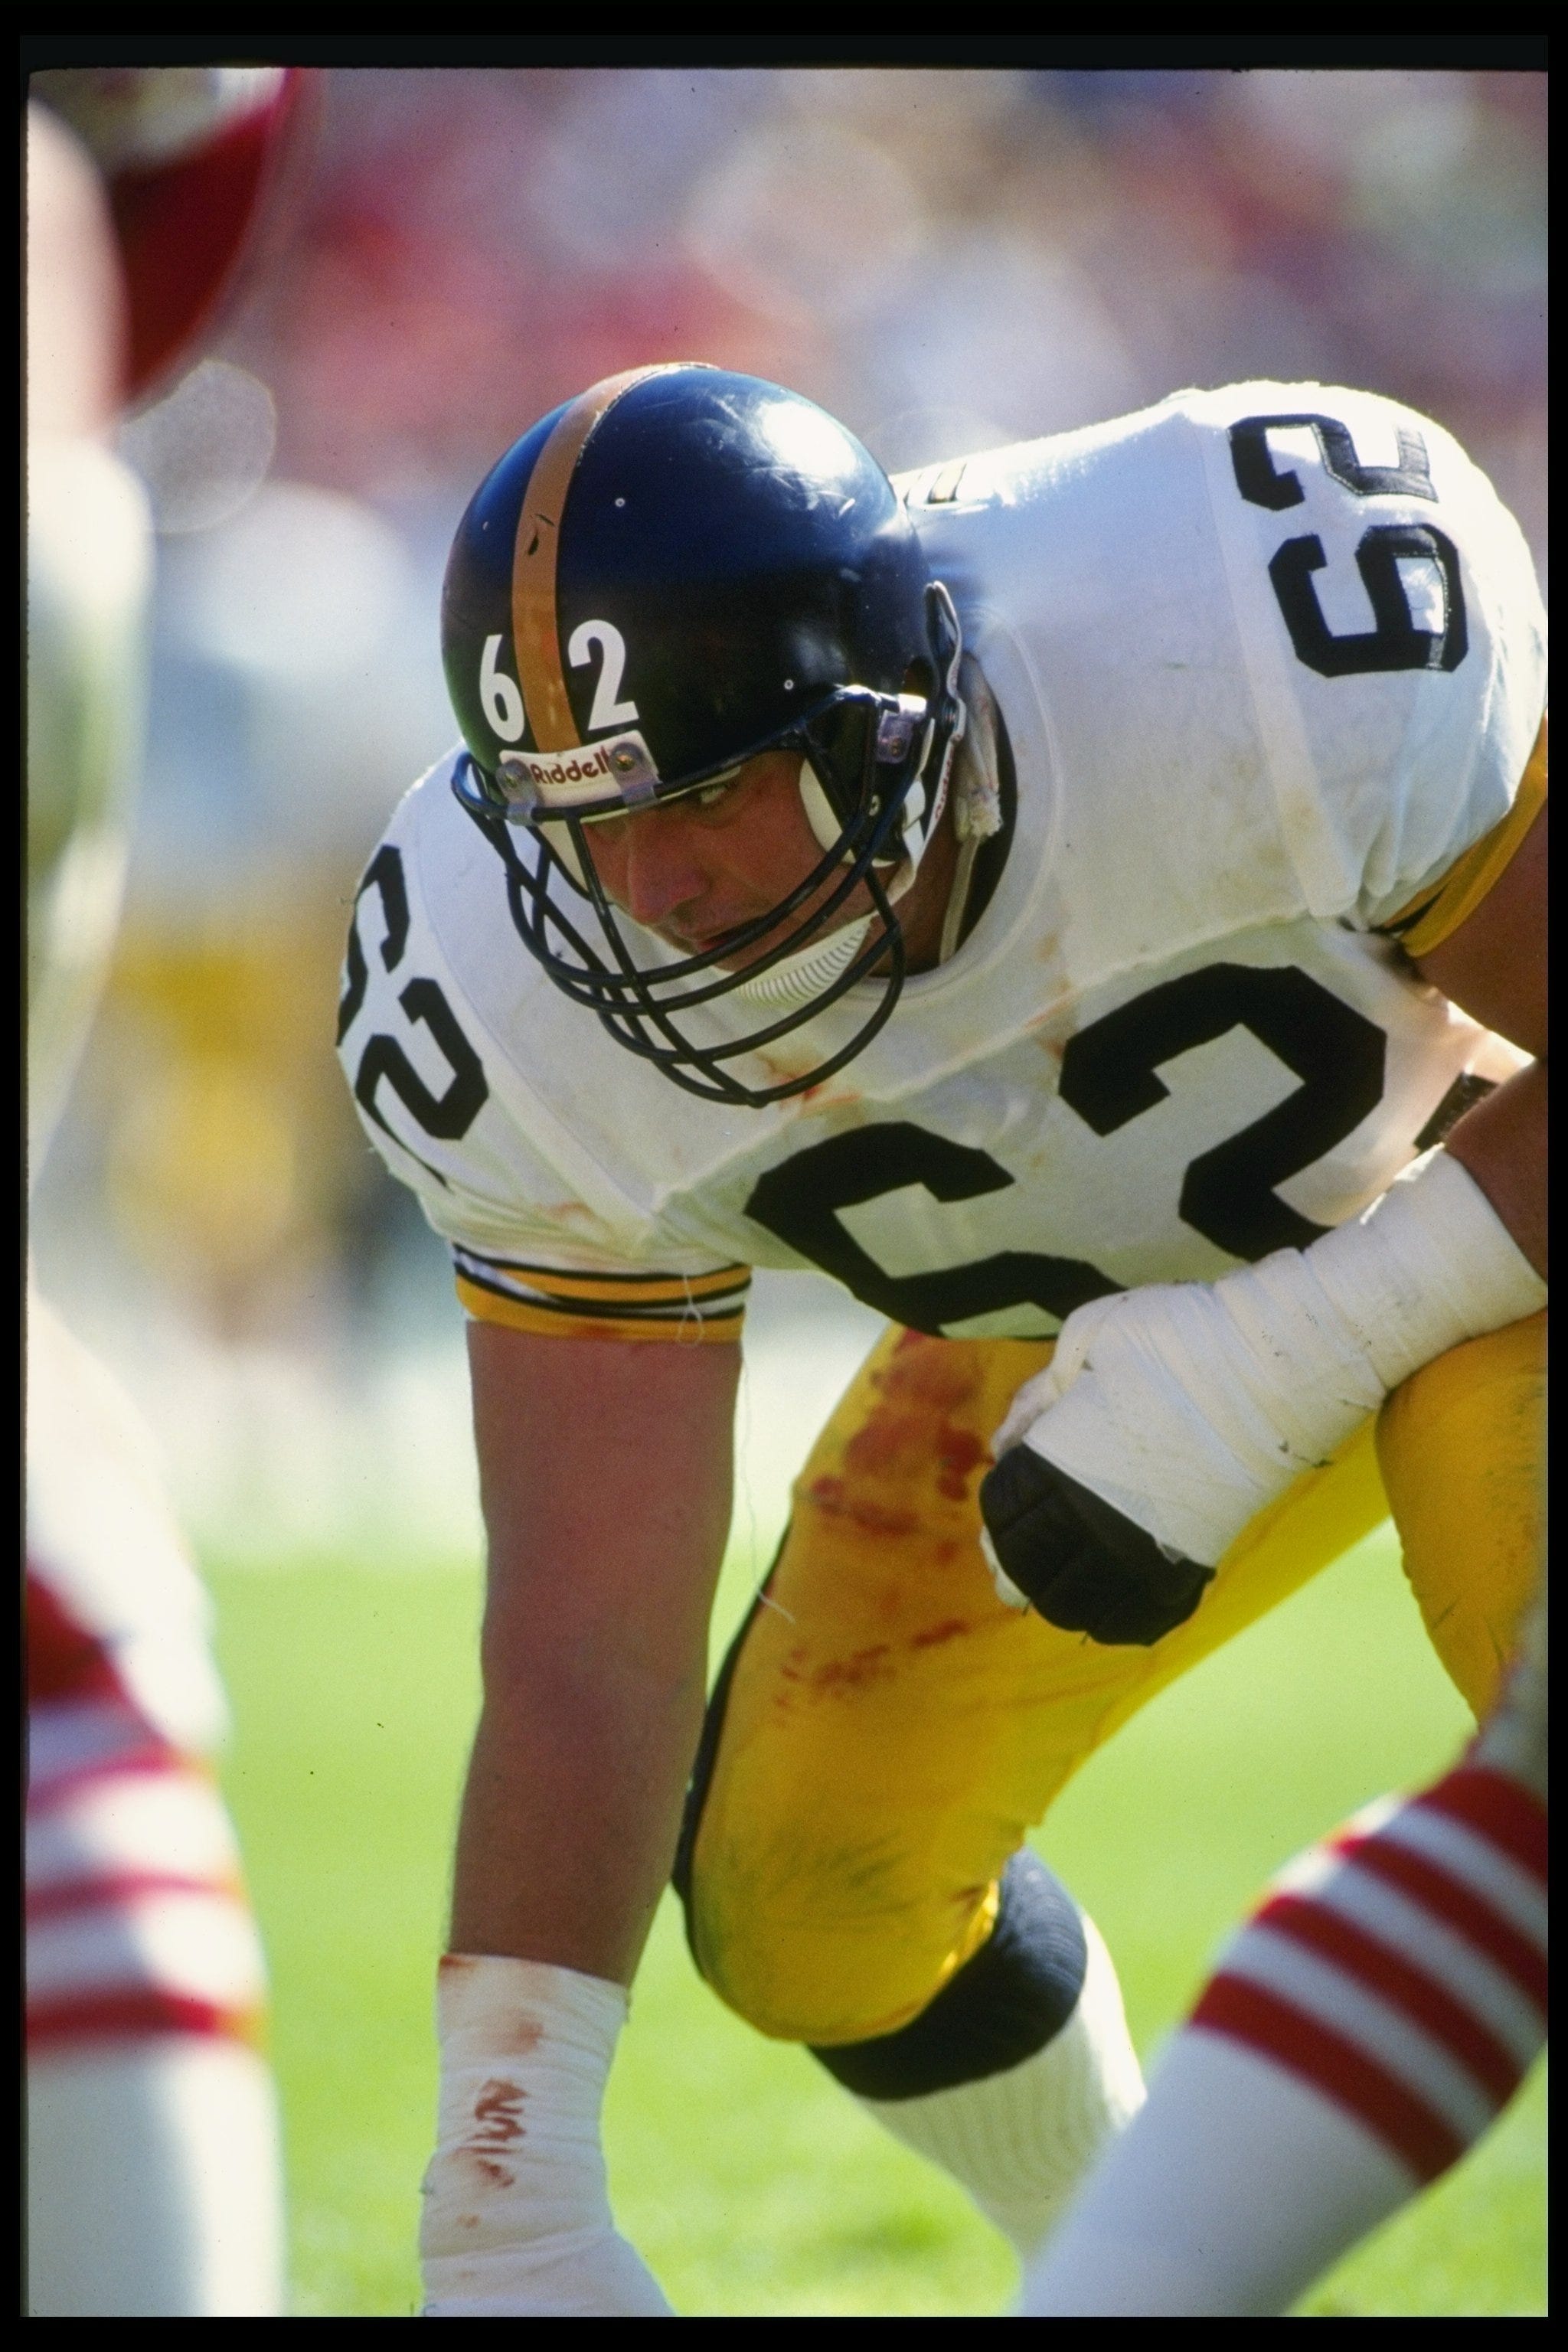 Former Steelers player, longtime broadcaster Tunch Ilkin dies at 63 after battling ALS